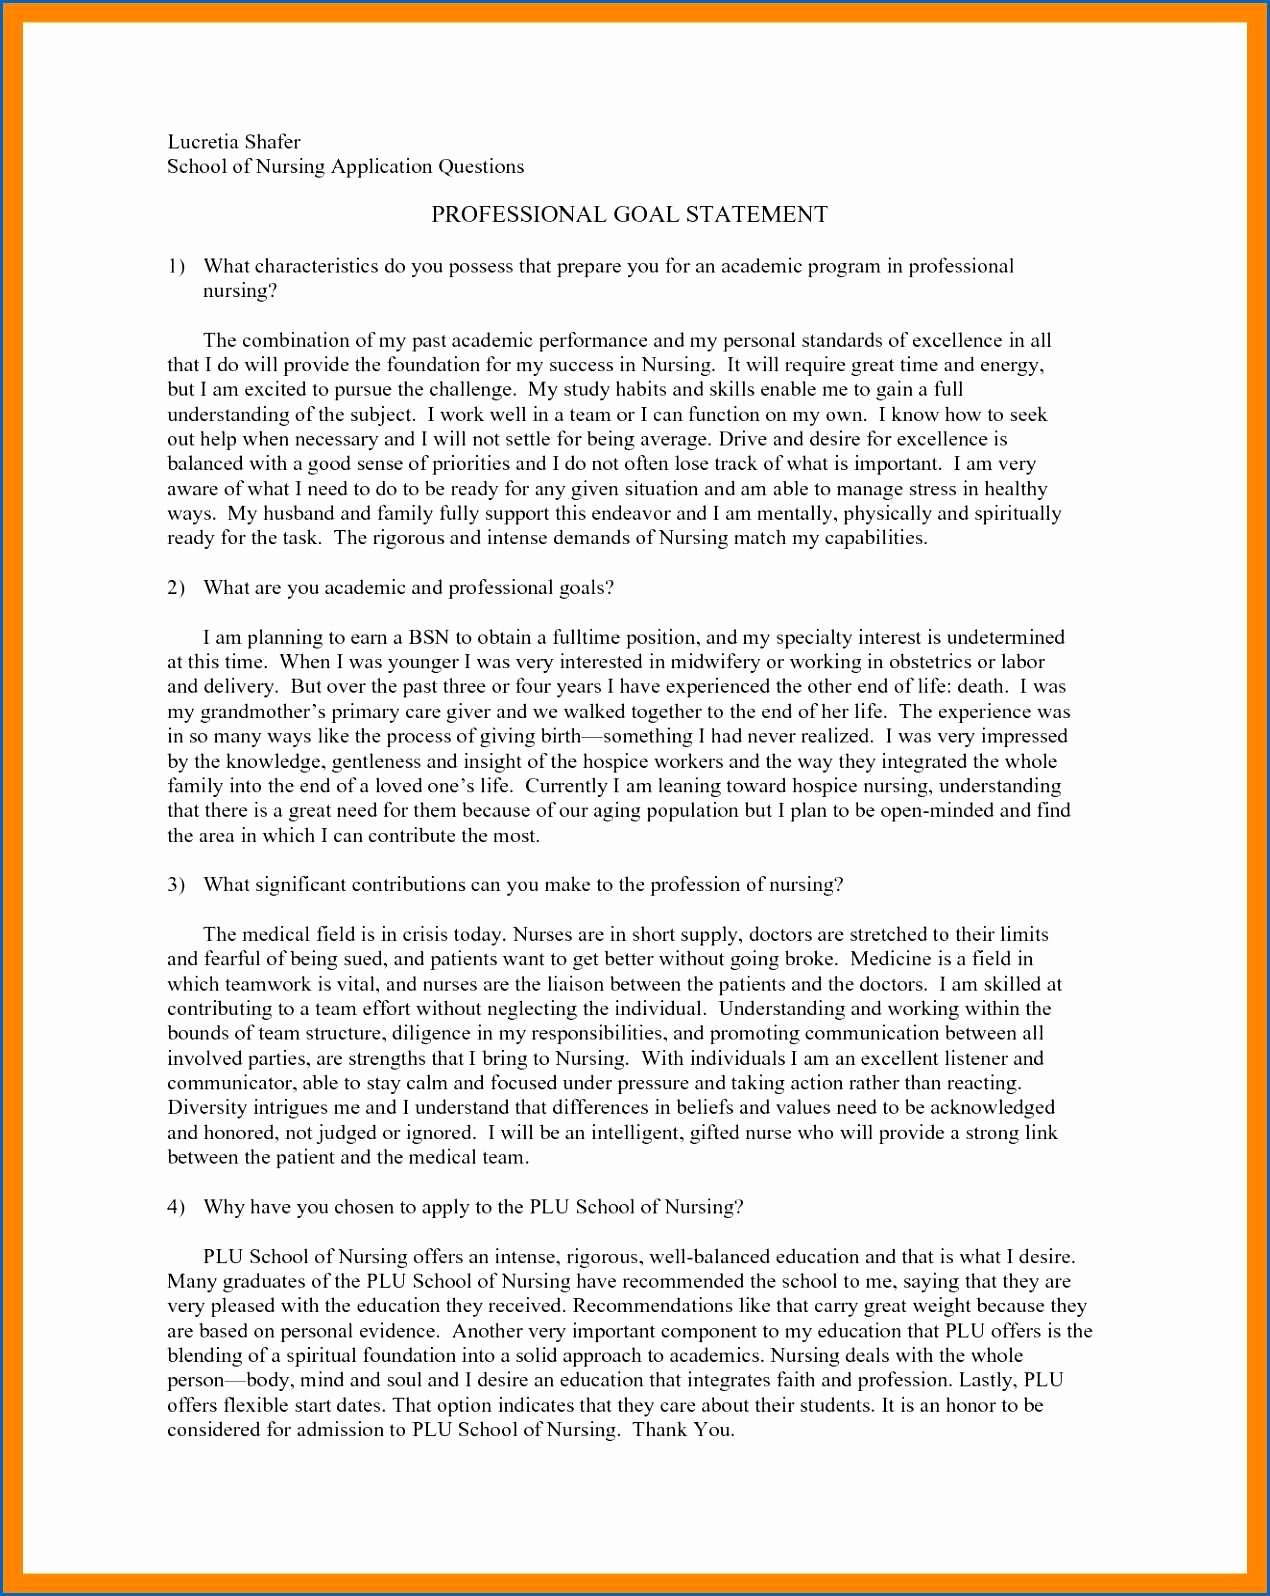 Personal Goal Statements Examples New 11 12 Examples Of Professional Goals